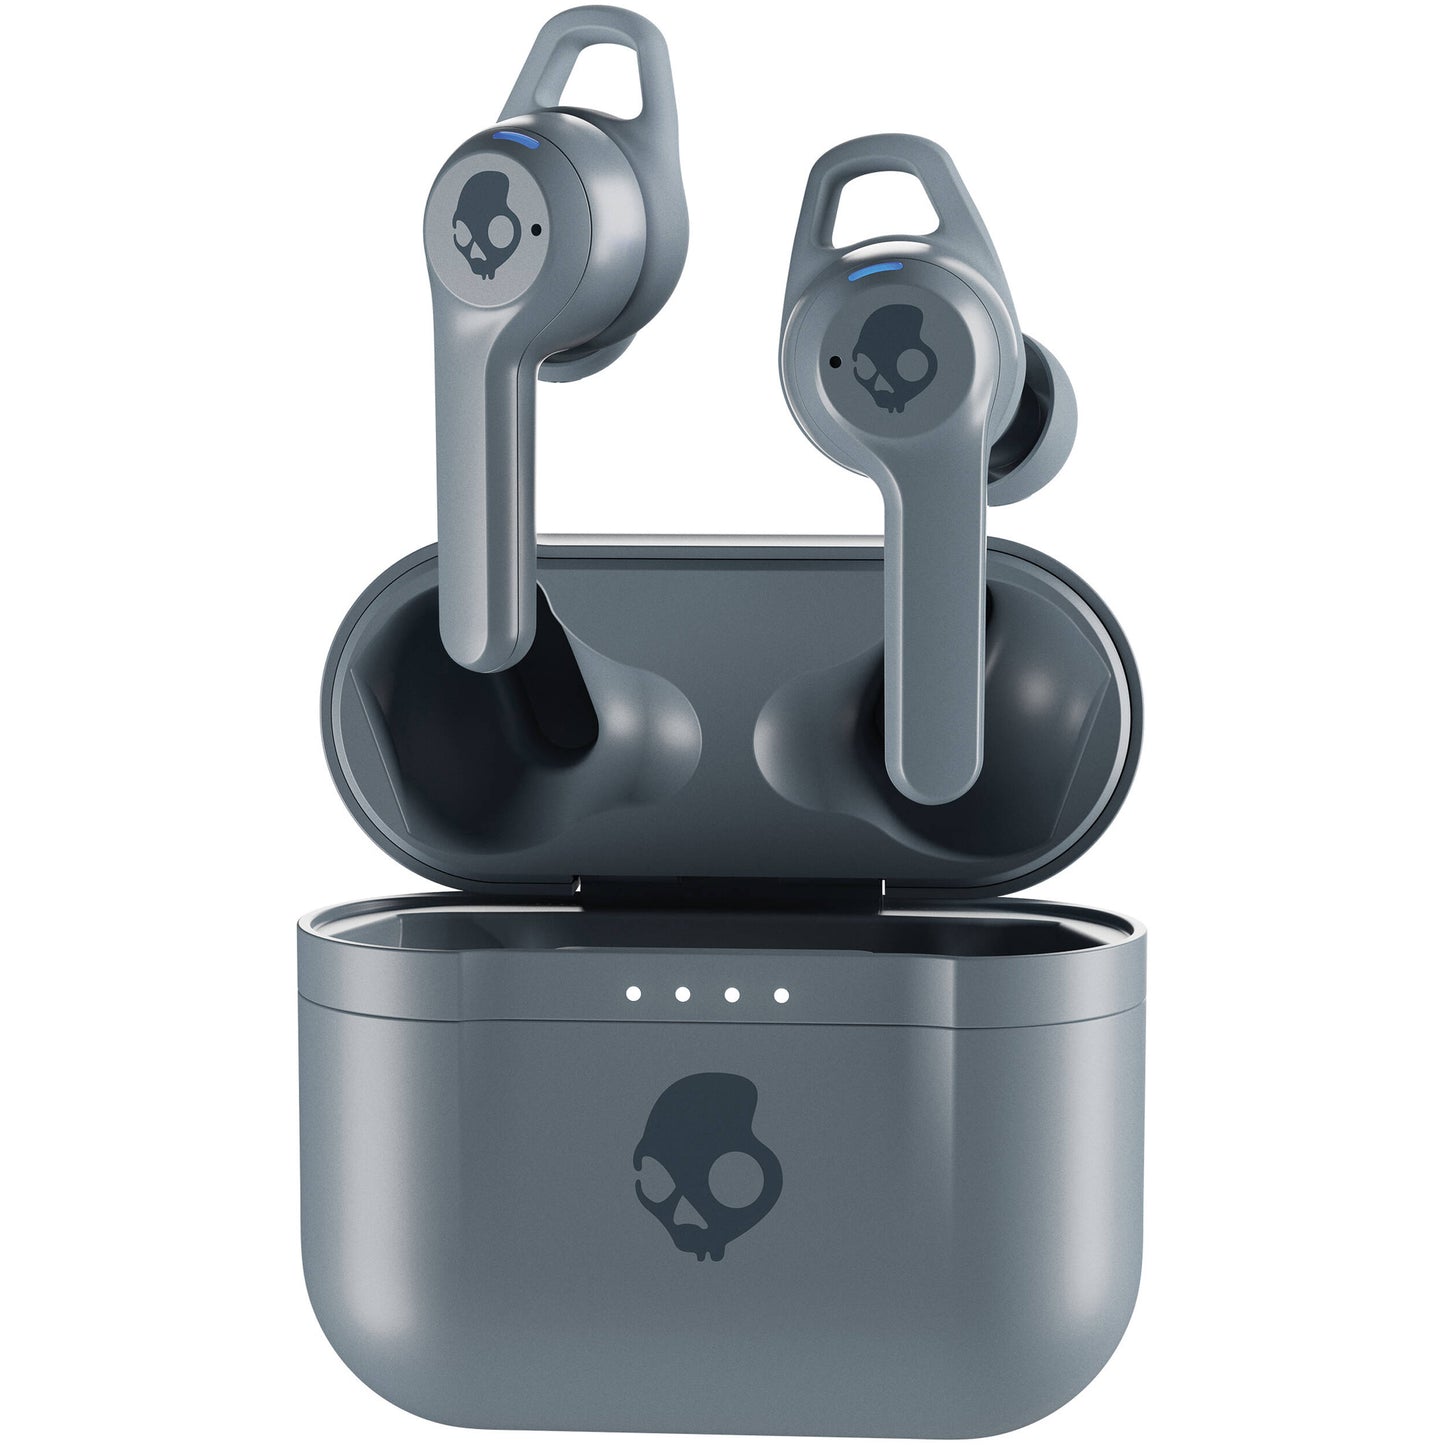 Skullcandy Indy ANC Noise-Canceling True Wireless Earbuds Bluetooth 5.0 Headphones with 9-Hours Playtime, Mic, Touch Controls